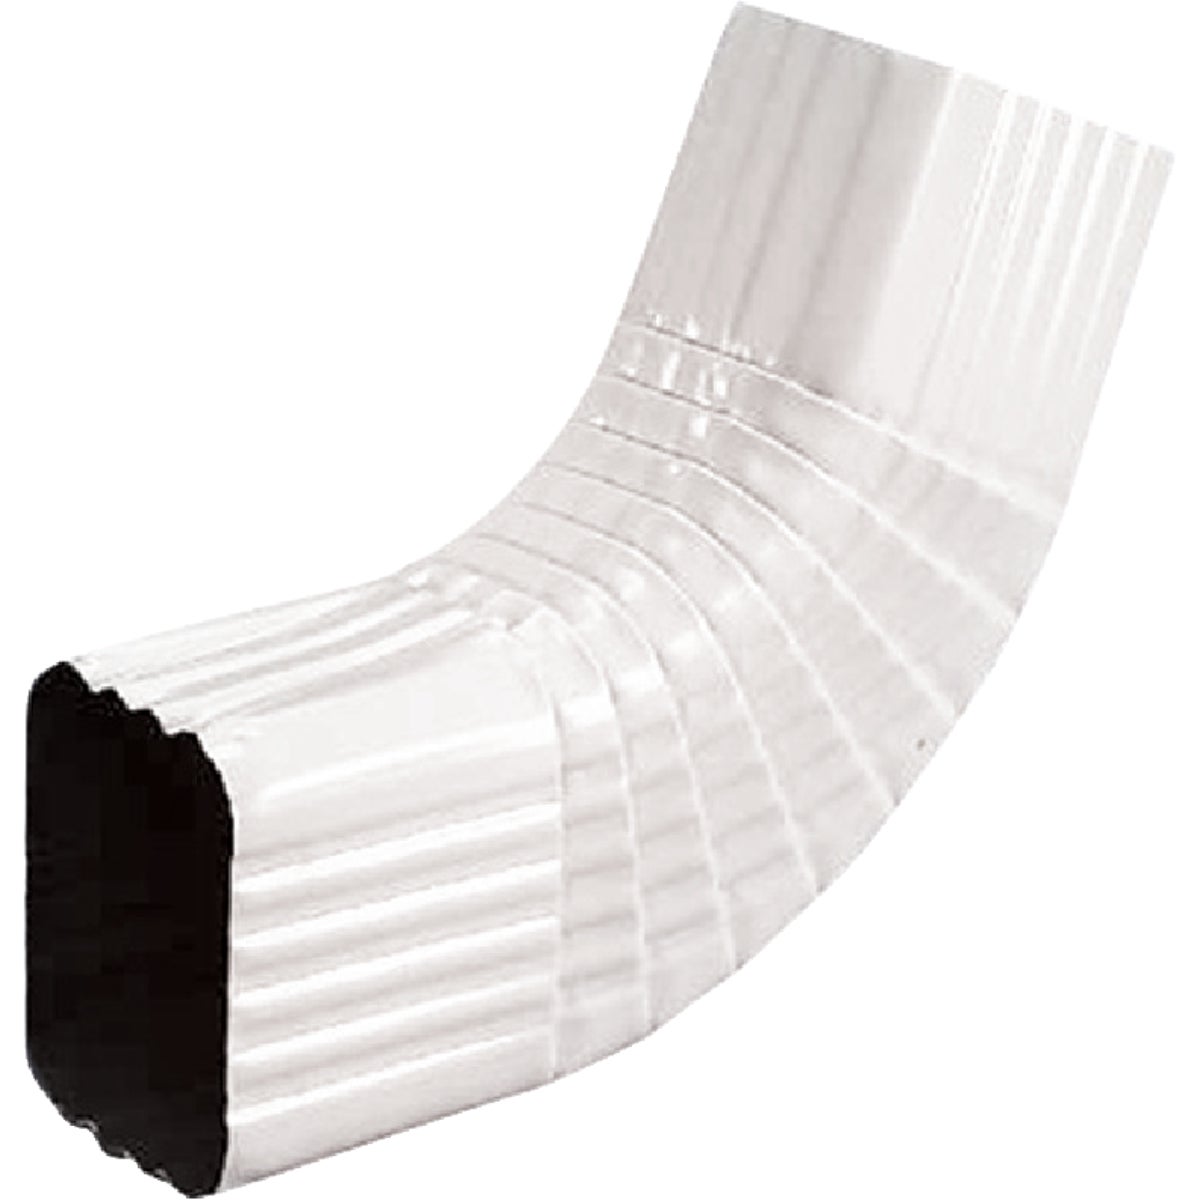 Spectra Metals 2 x 3 In. Aluminum White Side Downspout Elbow